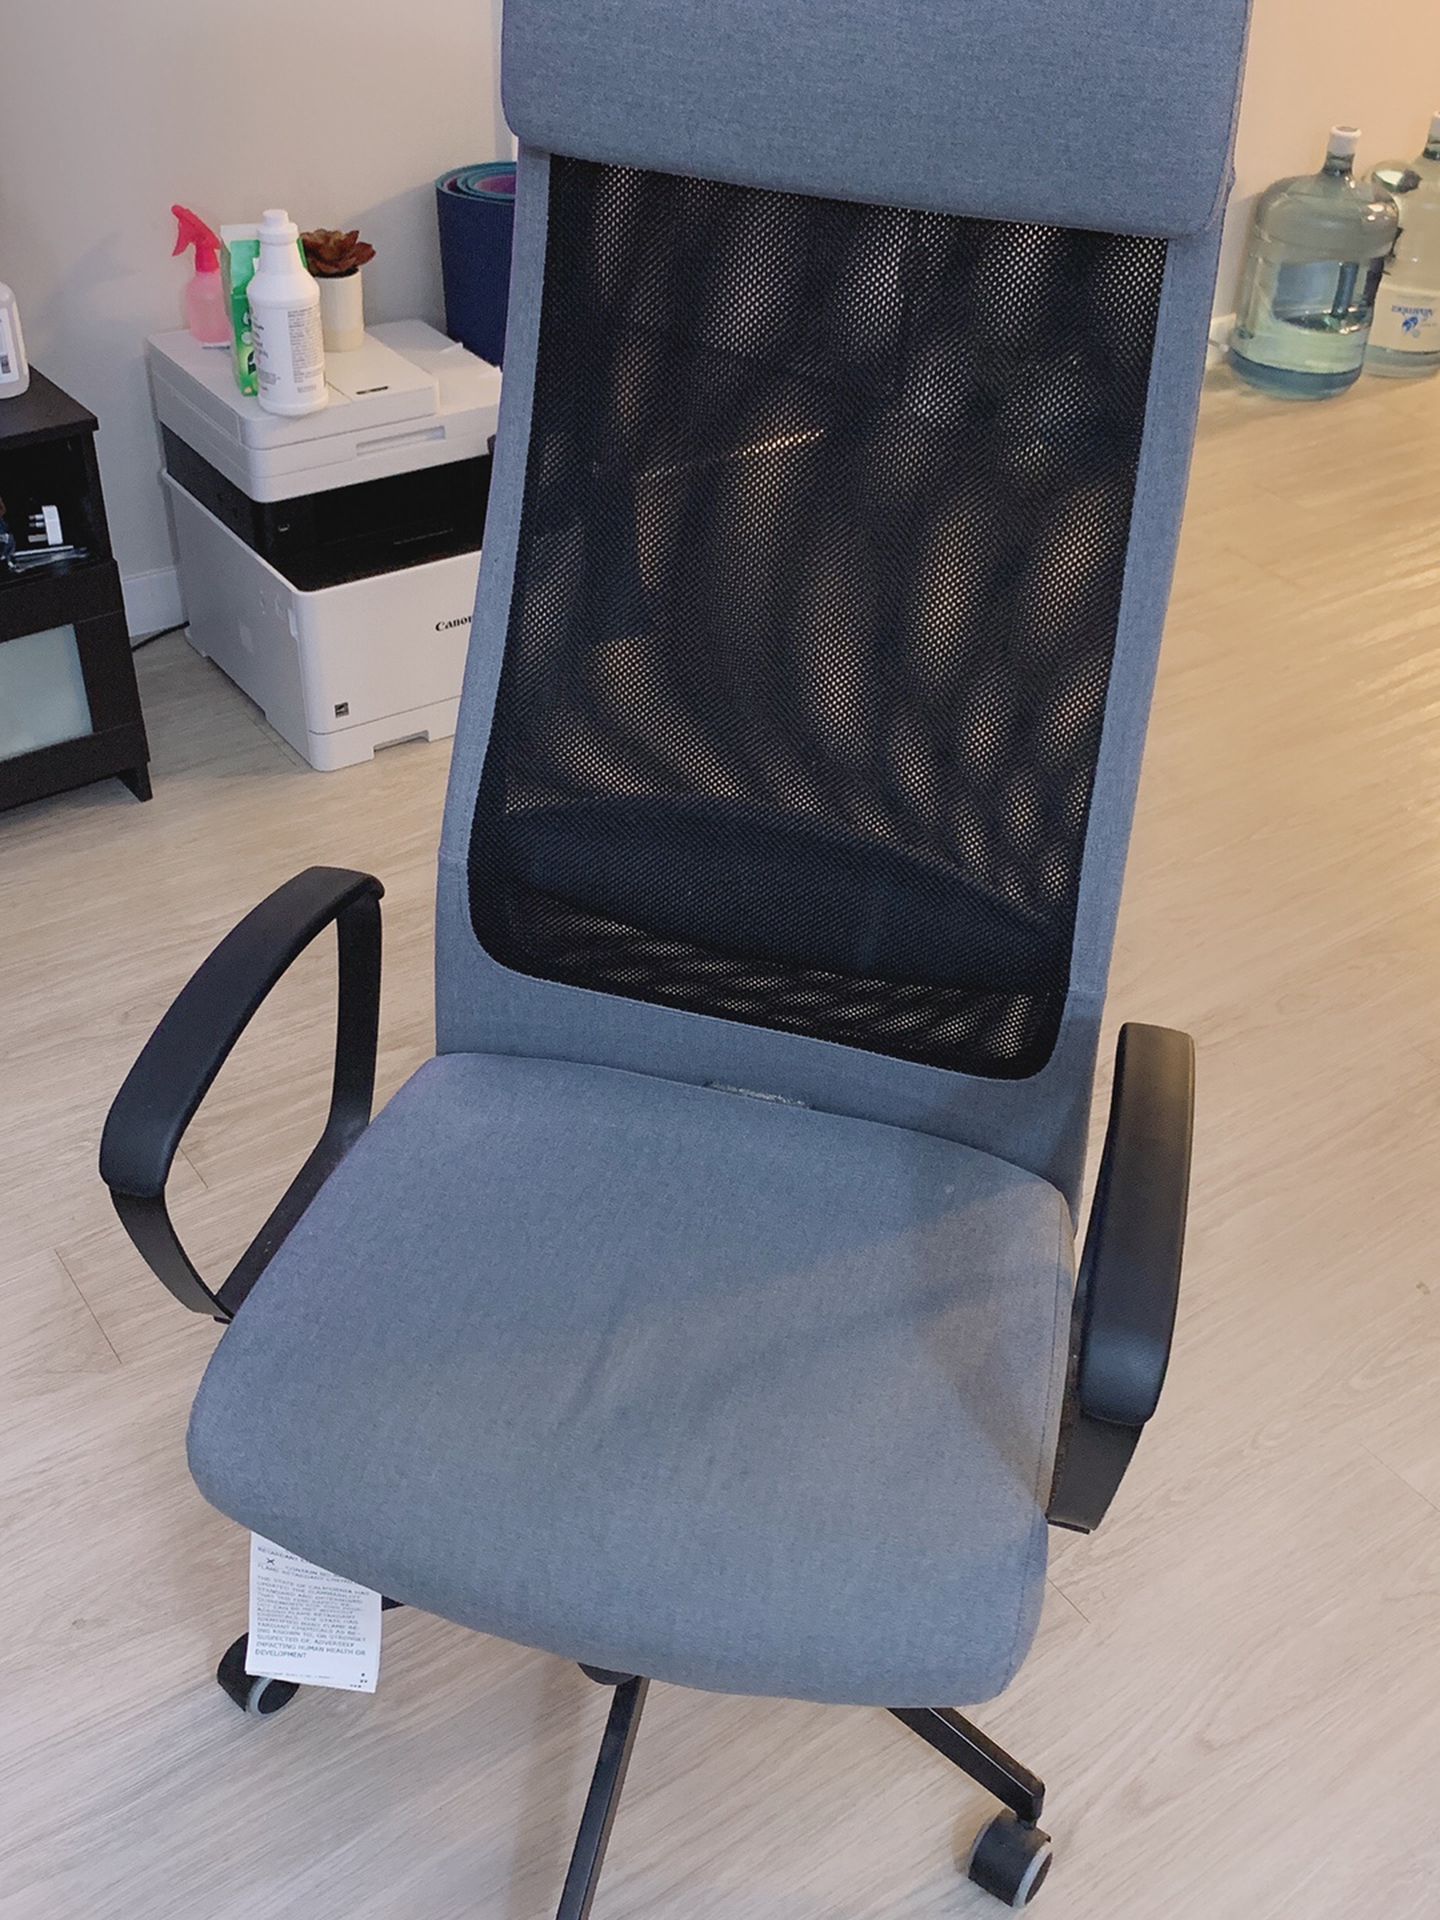 Ikea Adjustable Chair. Orginal Price 200, Ask For 60. Available After Jan 26th 2021.